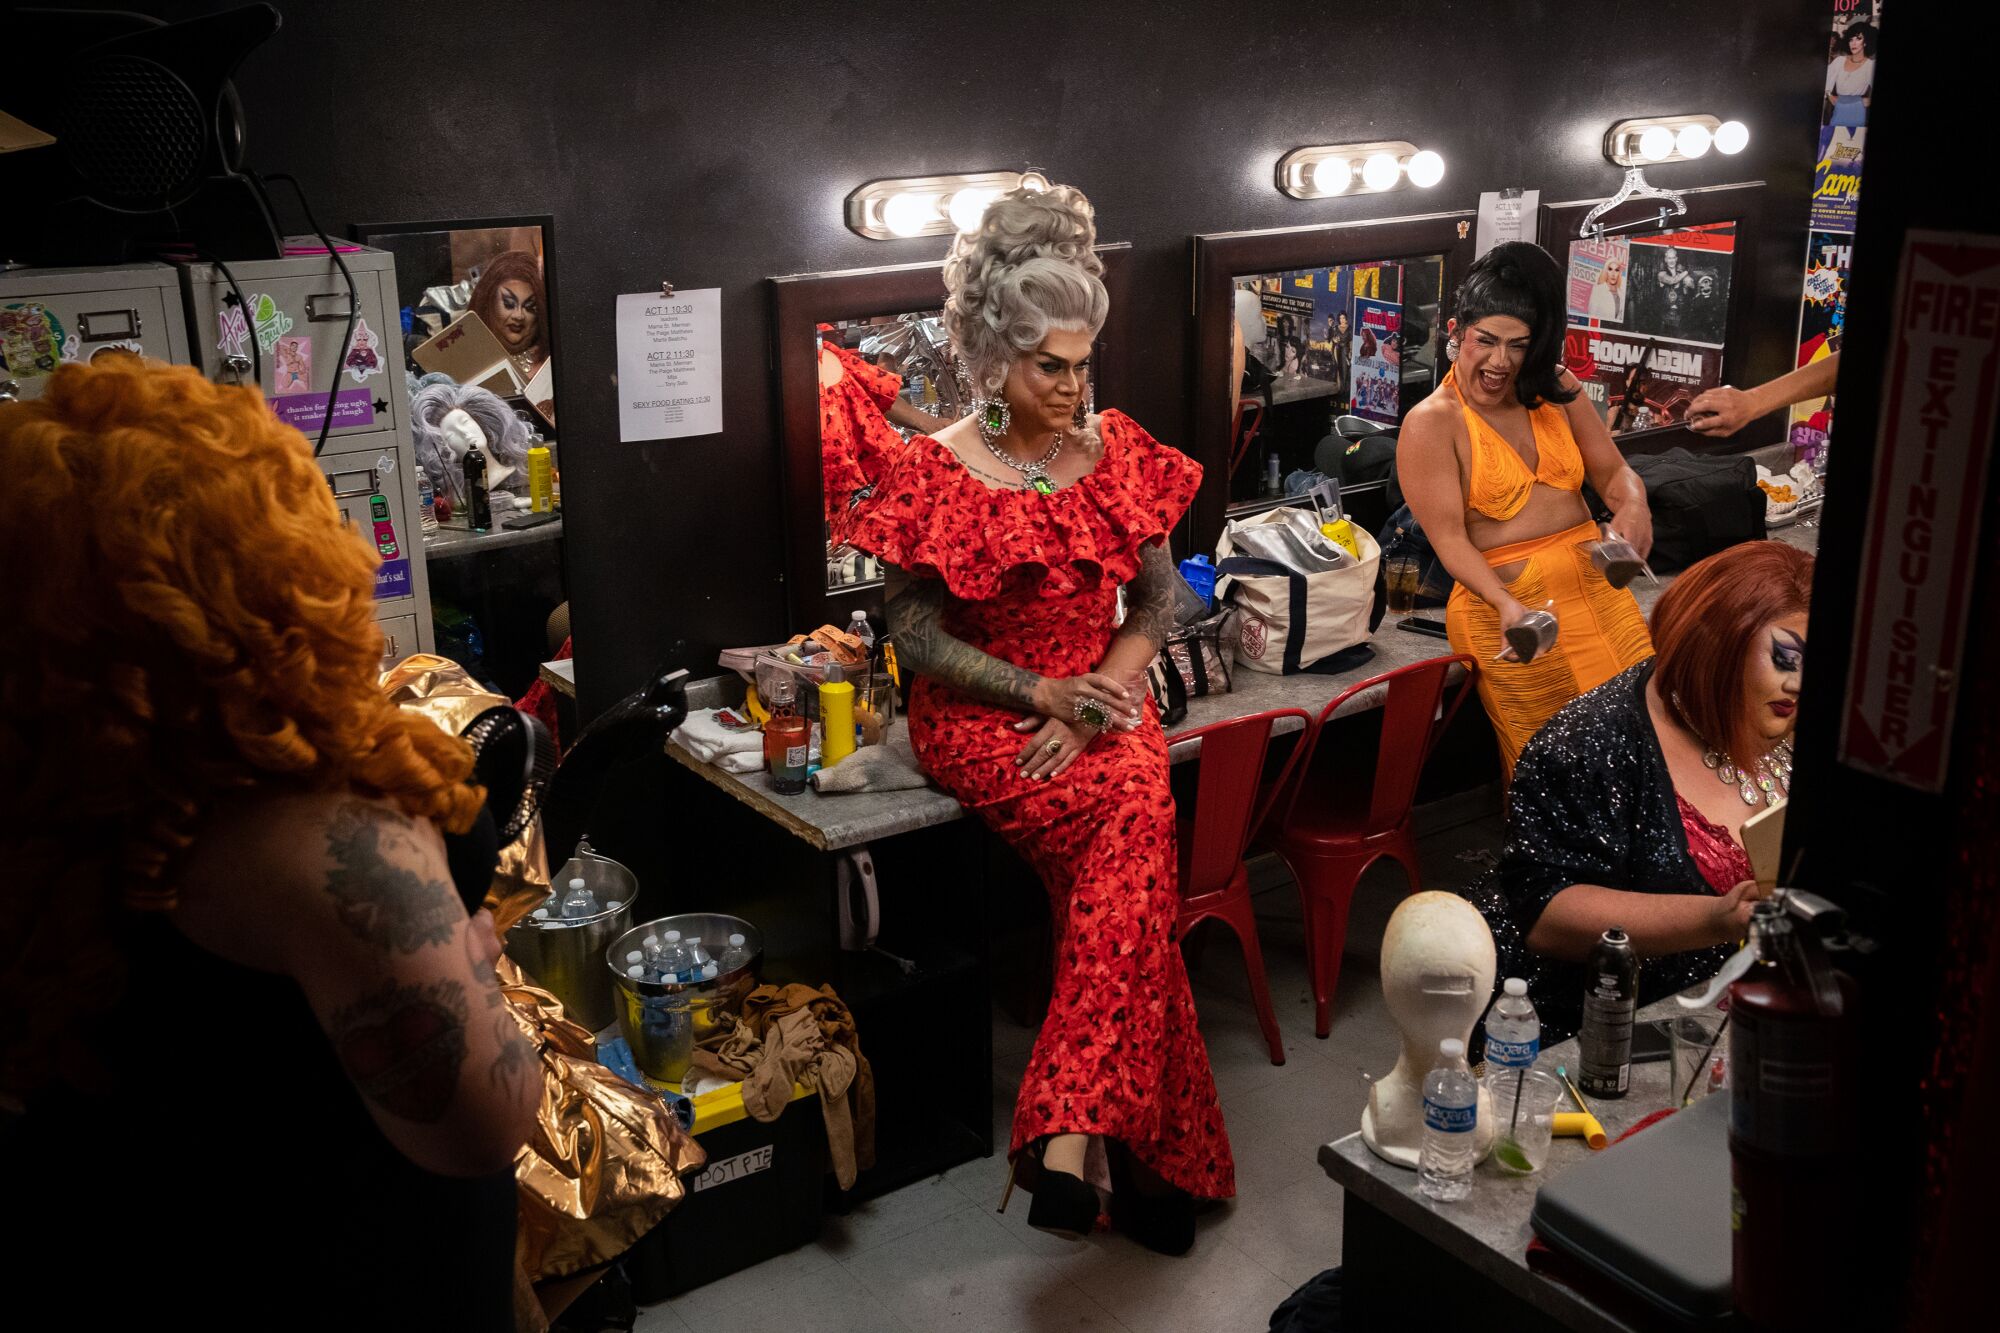 Several drag queens in colorful gowns wait backstage to perform.